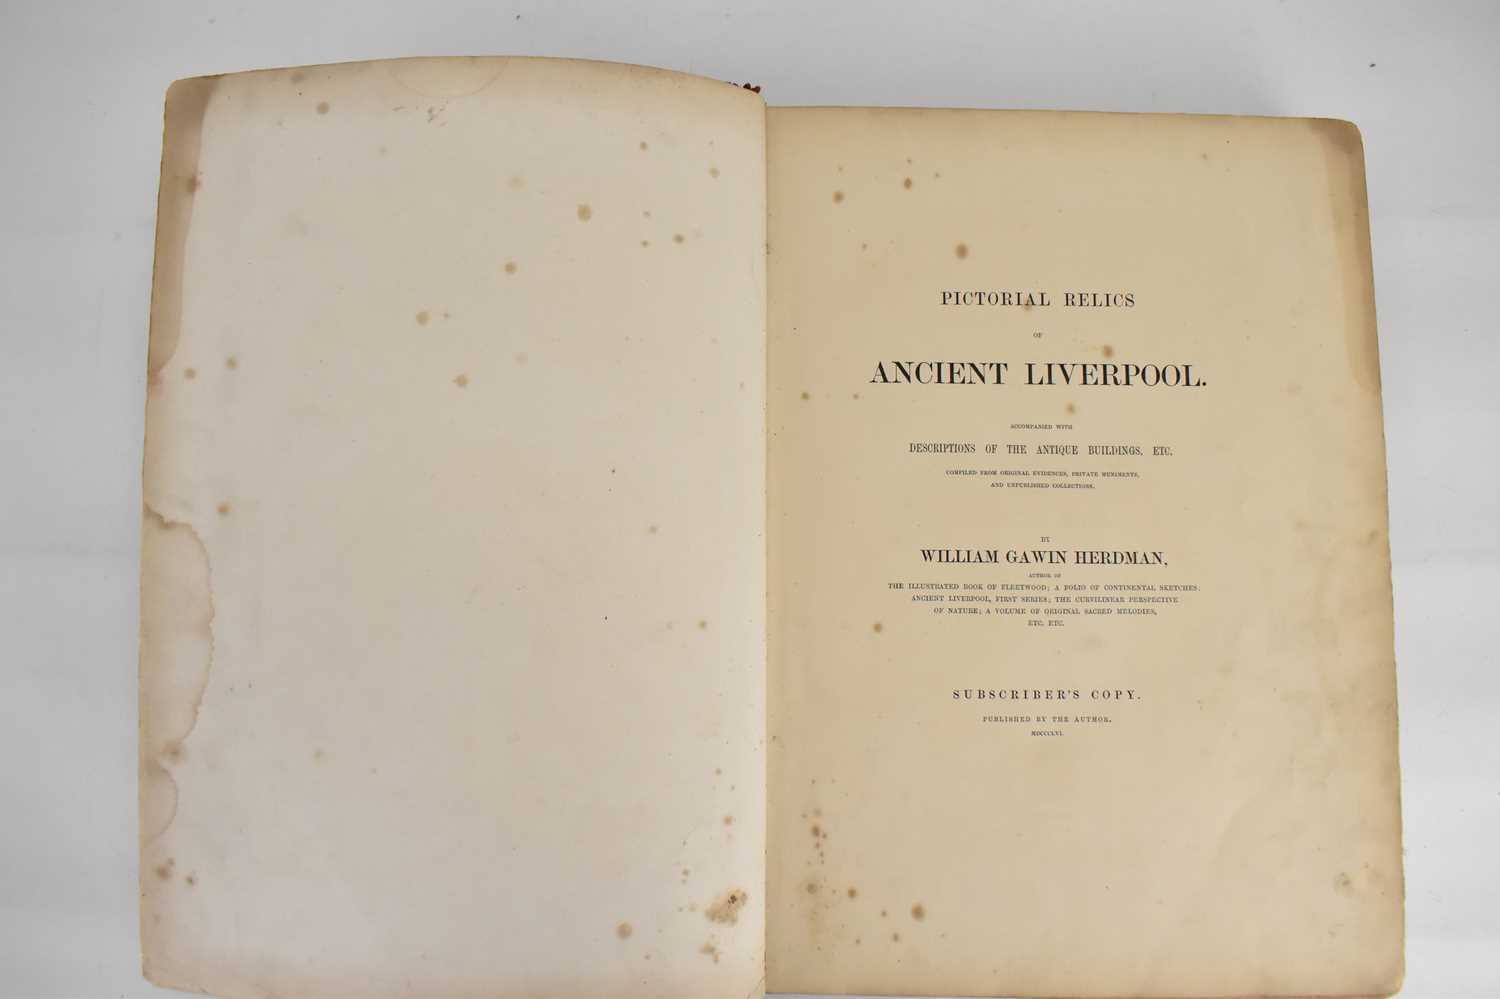 WILLIAM HERDMAN; 'Pictorial Relics of Ancient Liverpool', accompanied with descriptions of the - Image 3 of 10